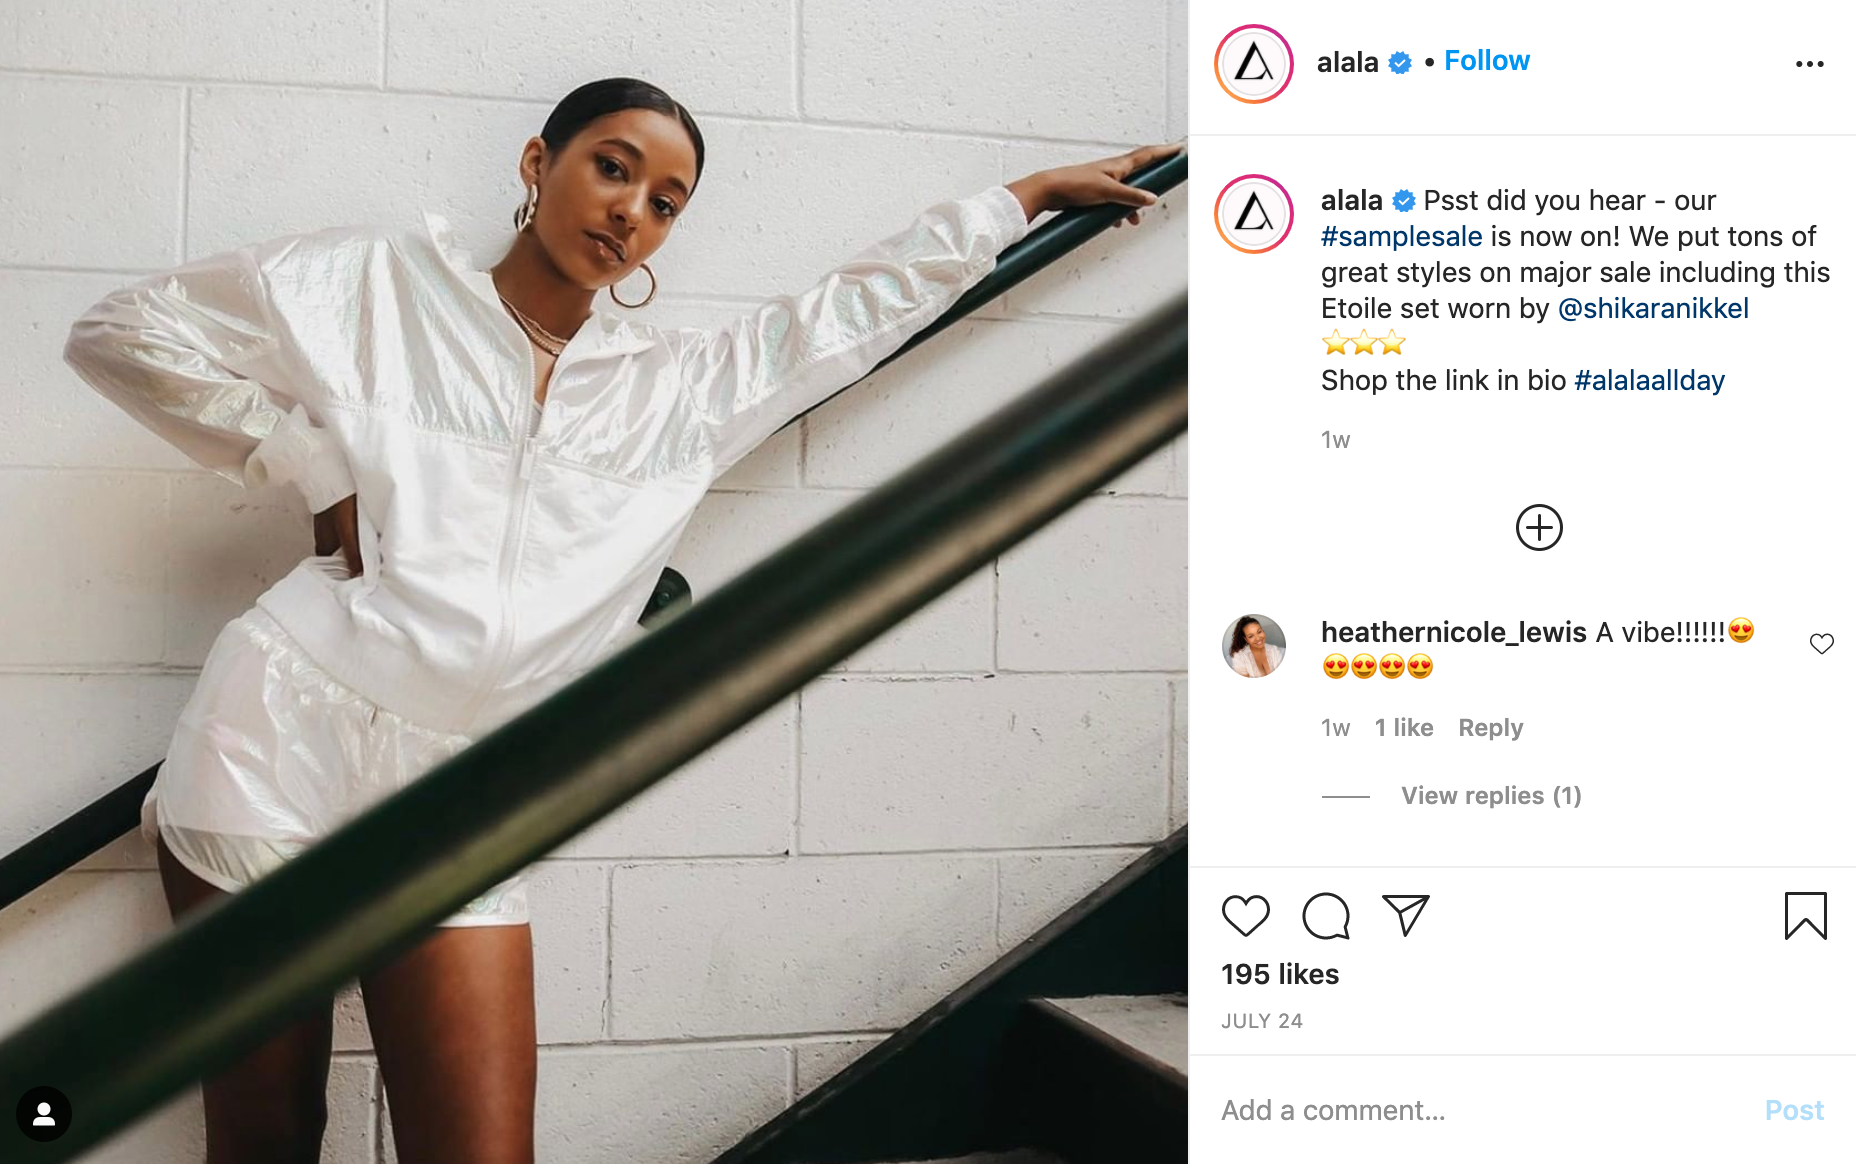 Instagram marketing for women-owned small businesses